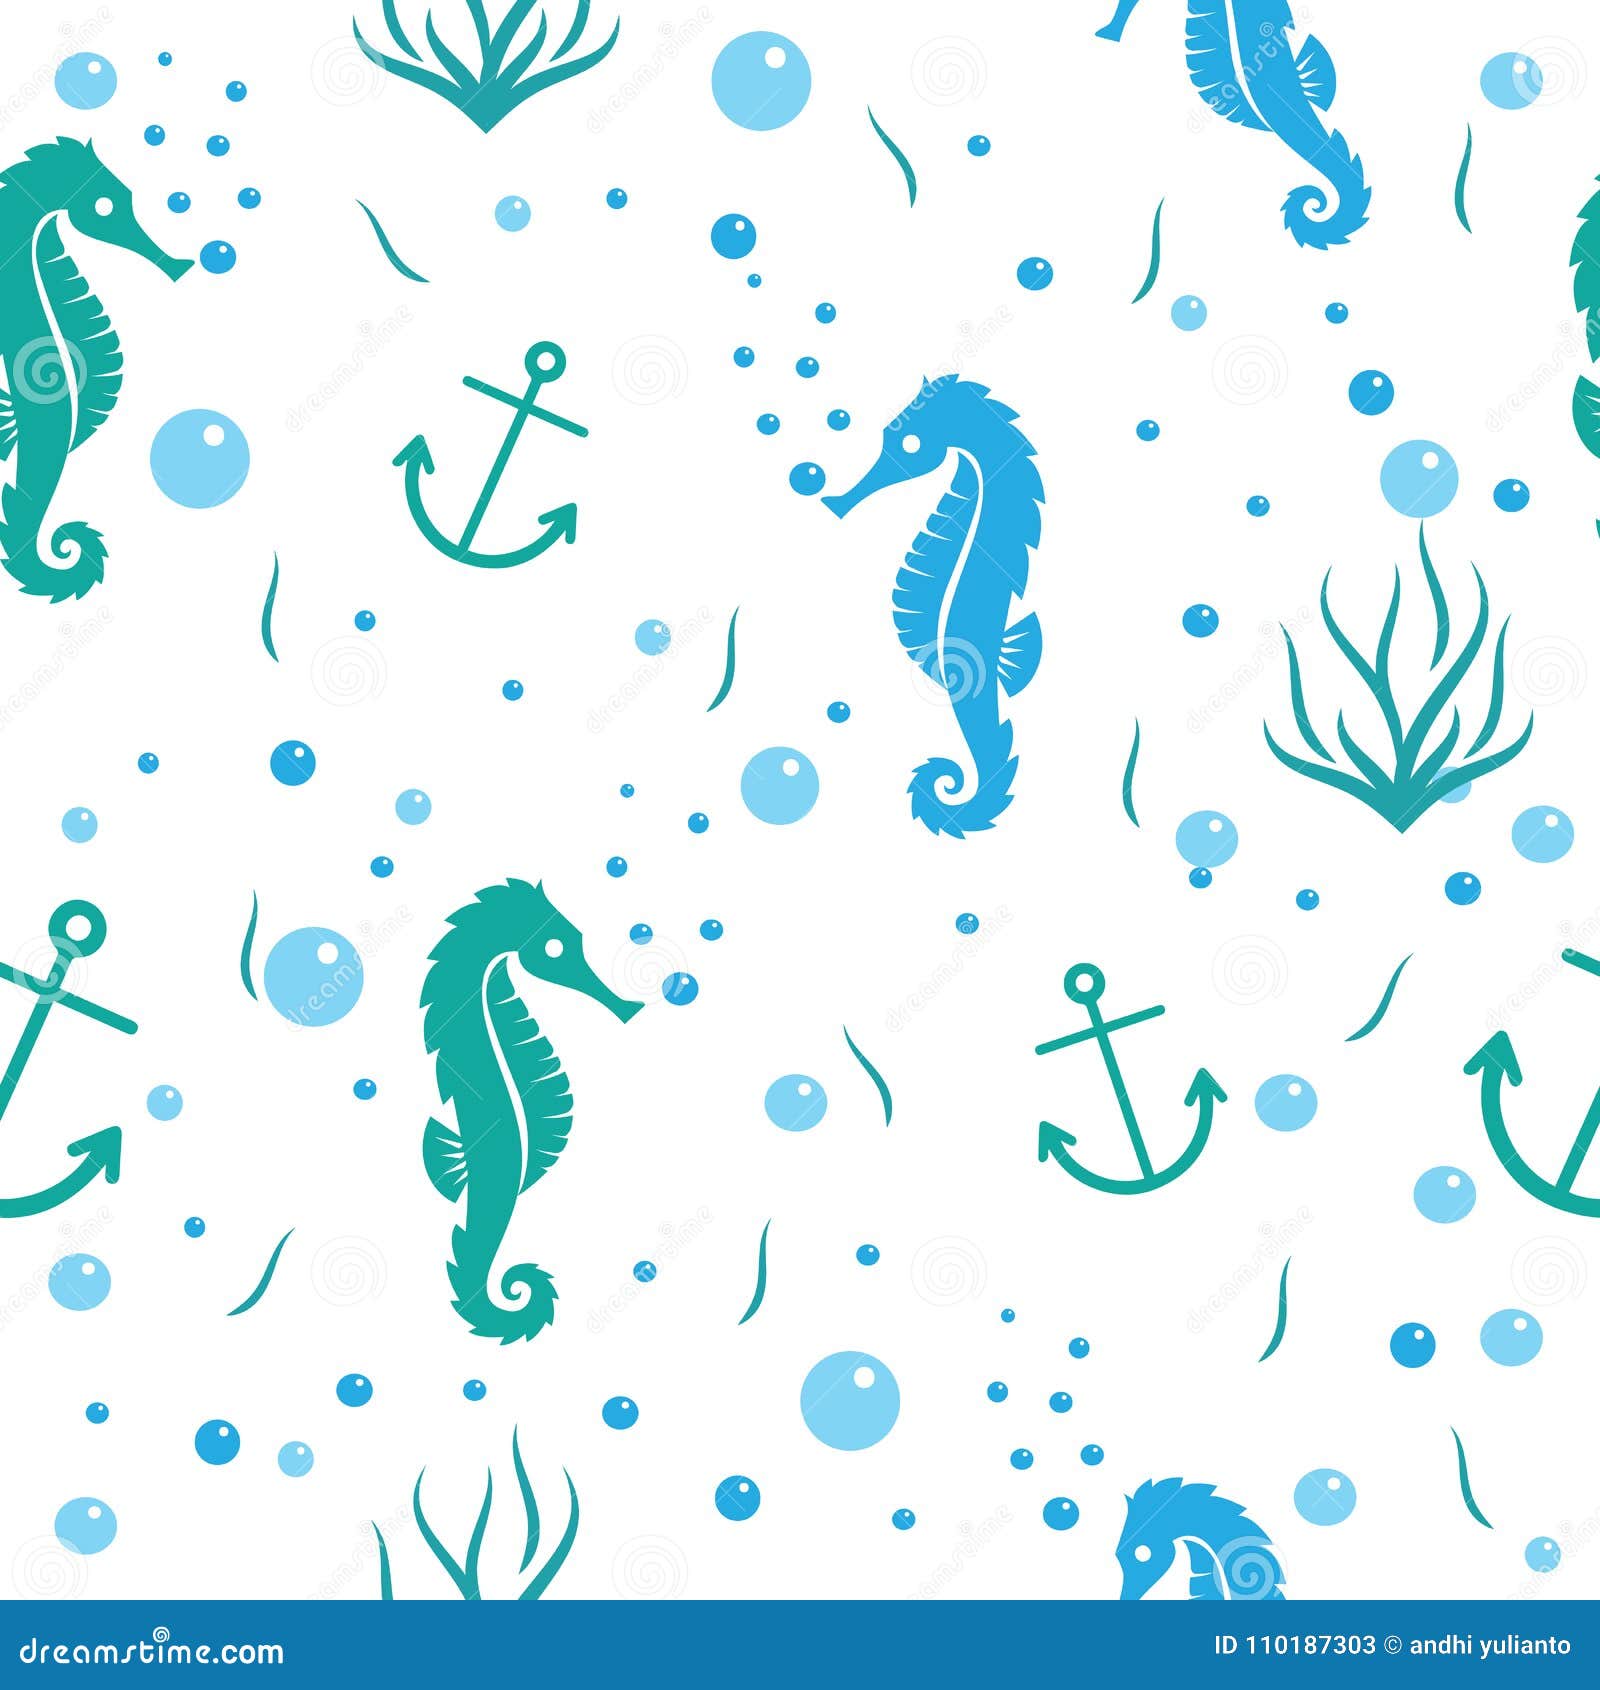 Teal and Blue Ocean Theme Seahorse Vector Seamless Pattern for Background  and Wallpaper Stock Illustration - Illustration of marine, teal: 110187303